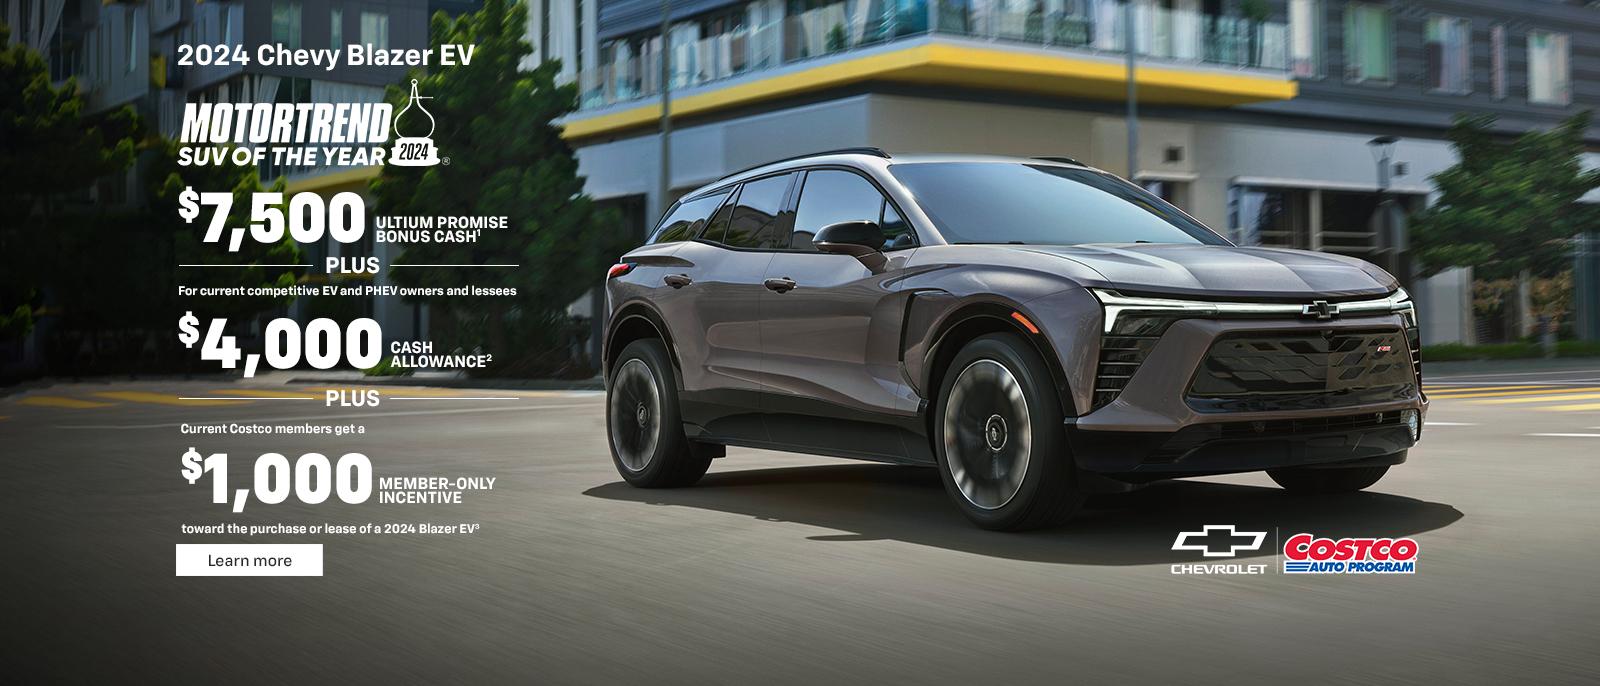 2024 Chevy Blazer EV. The first-ever, all-electric Blazer EV. Current Costco members get a $1,000 member-only incentive toward the purchase or lease of a 2024 Blazer EV. Plus, $7,500 Ultium Promise Bonus Cash.